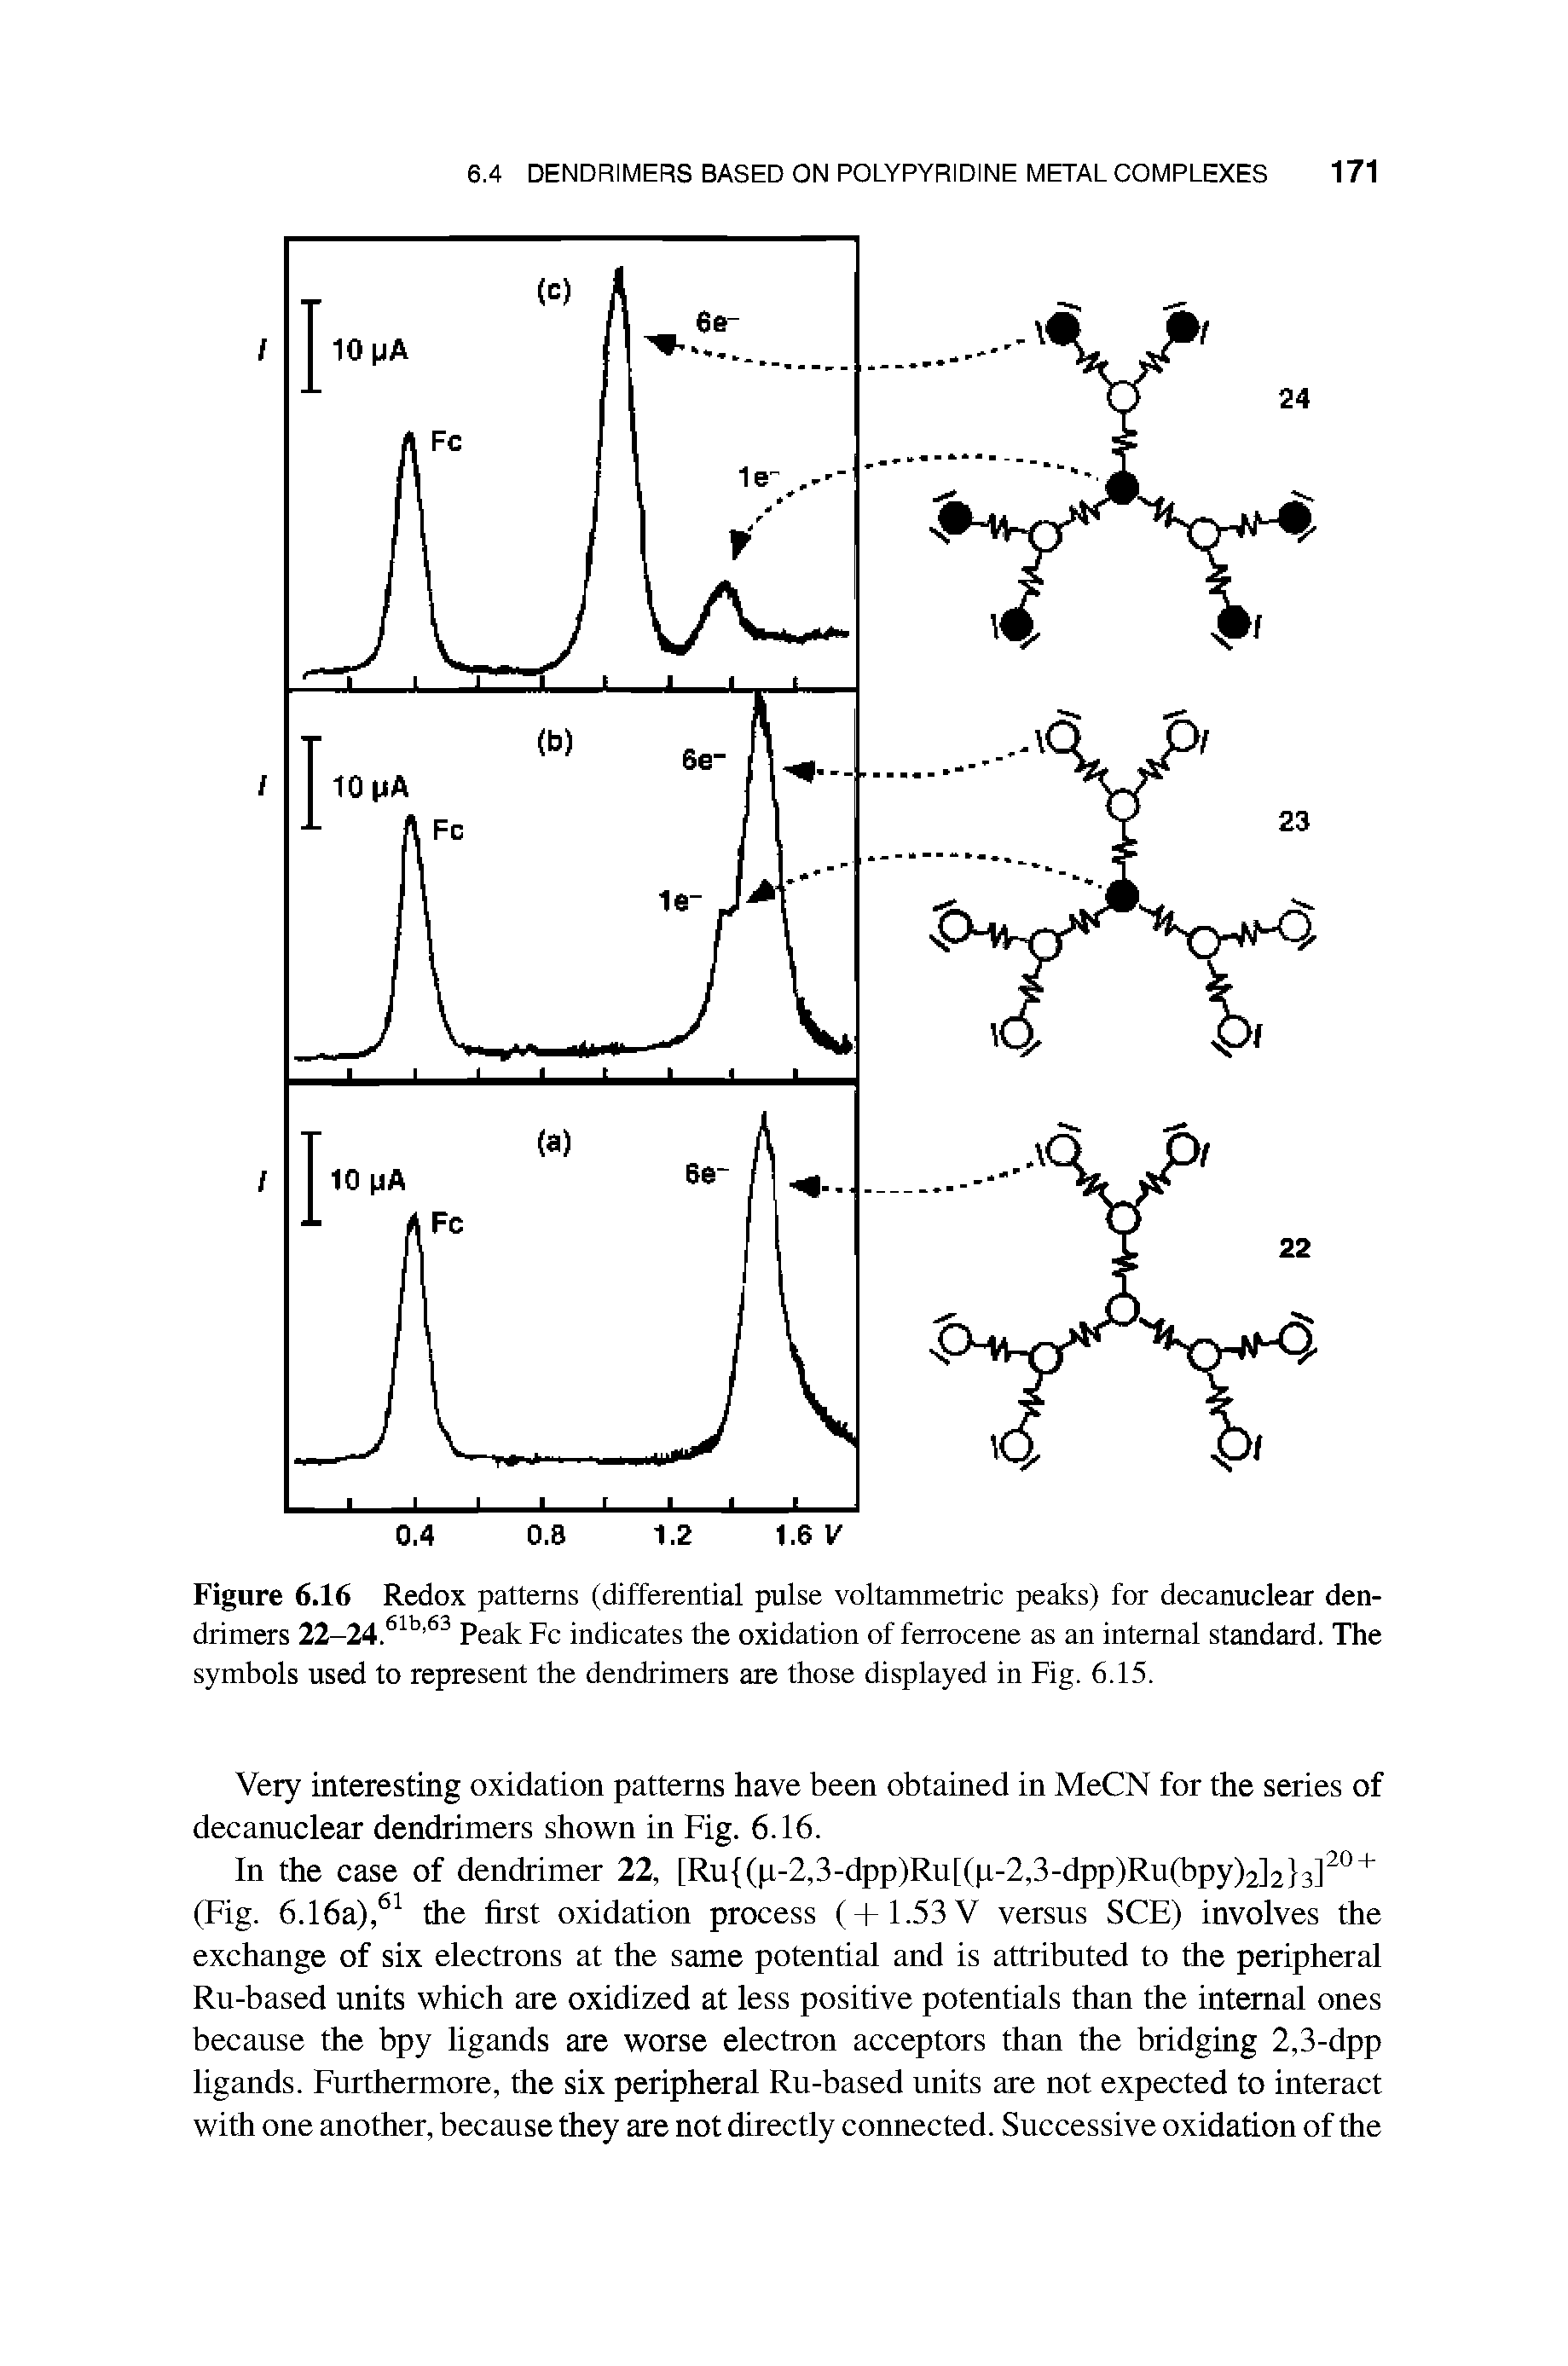 Figure 6.16 Redox patterns (differential pulse voltammetric peaks) for decanuclear den-drimers 22-24.61b 63 Peak Fc indicates the oxidation of ferrocene as an internal standard. The symbols used to represent the dendrimers are those displayed in Fig. 6.15.